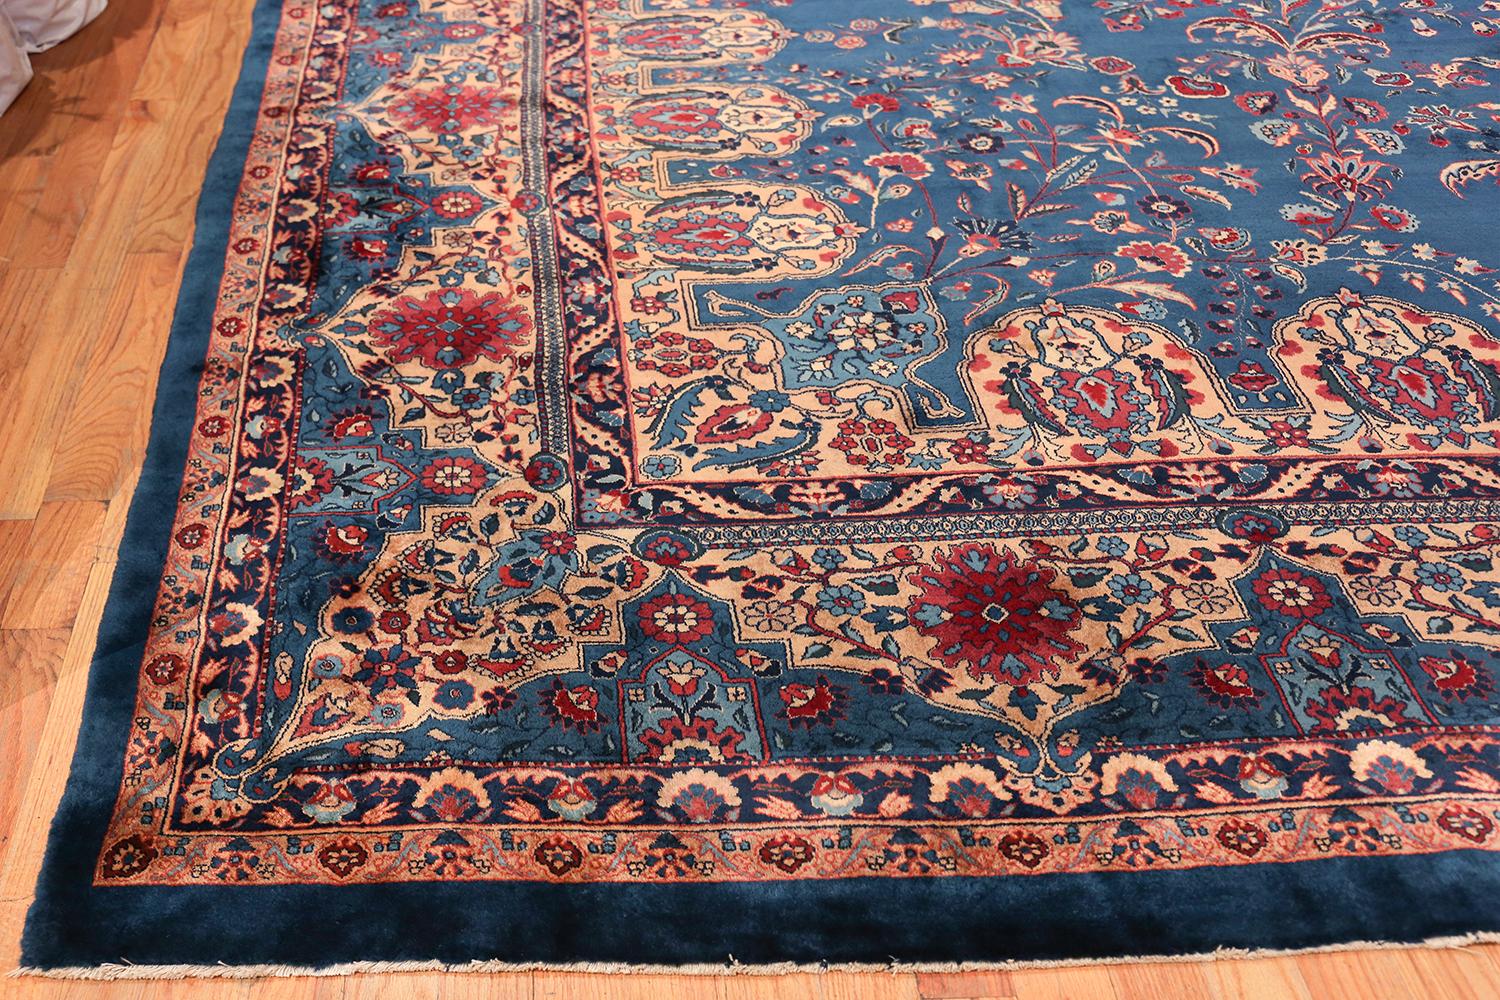 20th Century Blue Oversize Floral Antique Indian Rug. Size: 17 ft x 20 ft 10 in